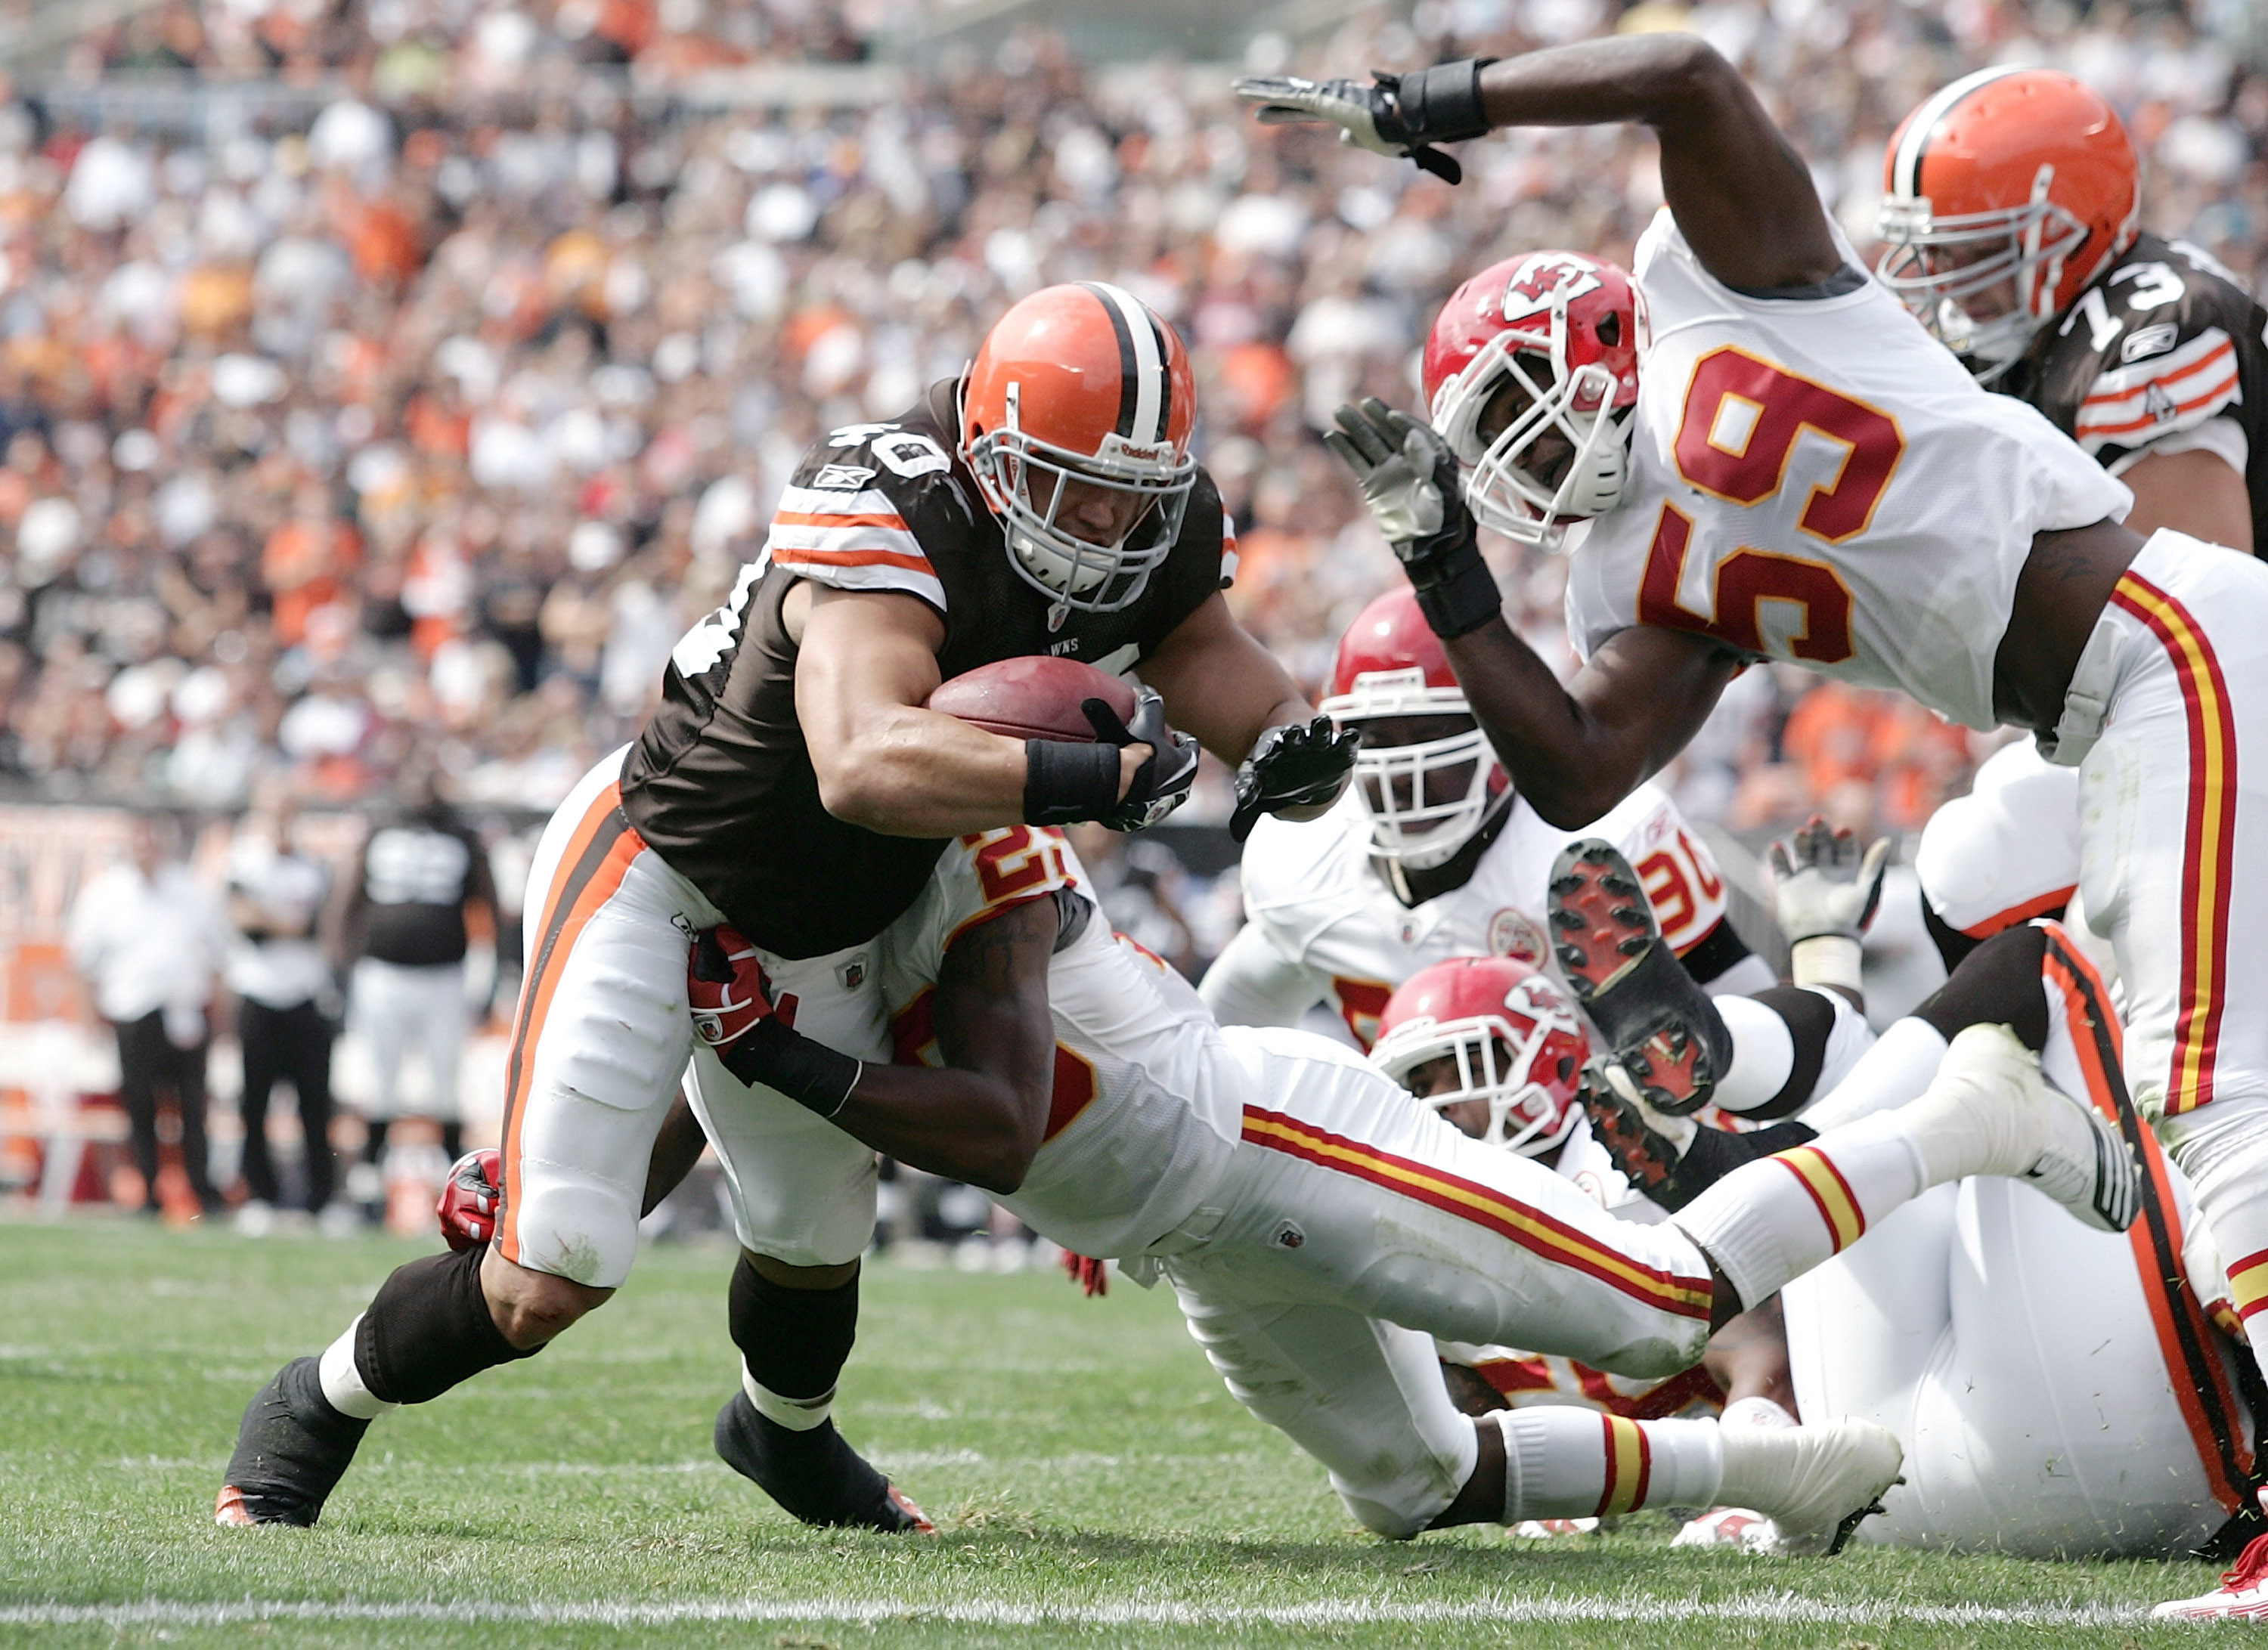 CLEVELAND - SEPTEMBER 19:  Running back Peyton Hillis #40 of the Cleveland Browns runs the ball for a touchdown as he is hit by linebacker Jovan Belcher #59 of the Kansas City Chiefs at Cleveland Browns Stadium on September 19, 2010 in Cleveland, Ohio.  (